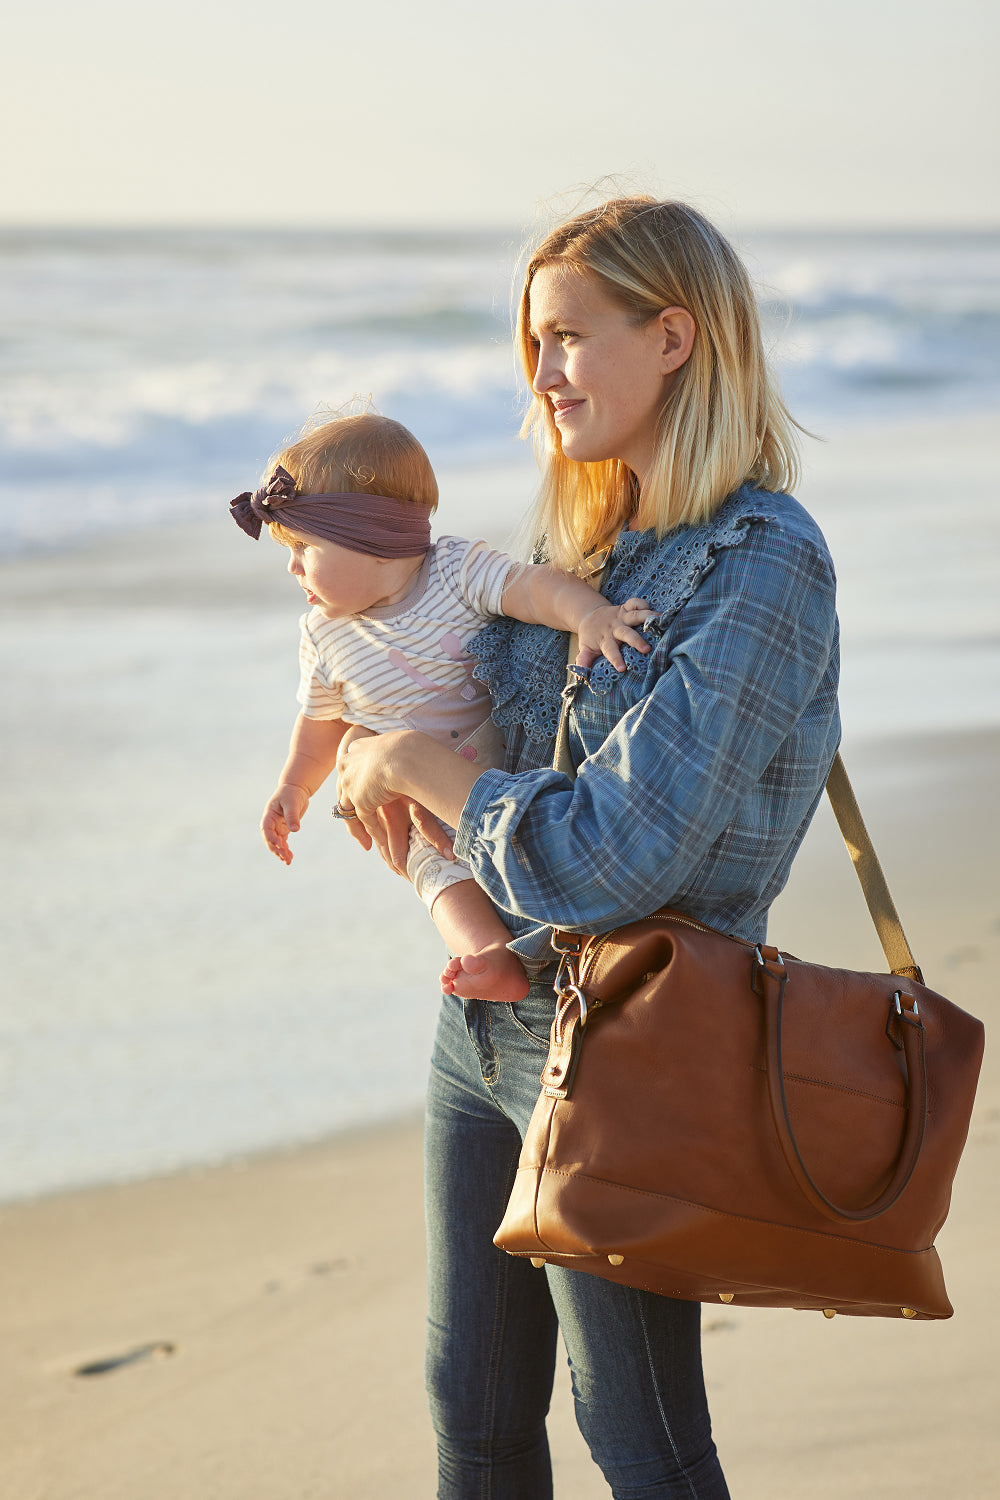 Why a Leather Diaper Bag?